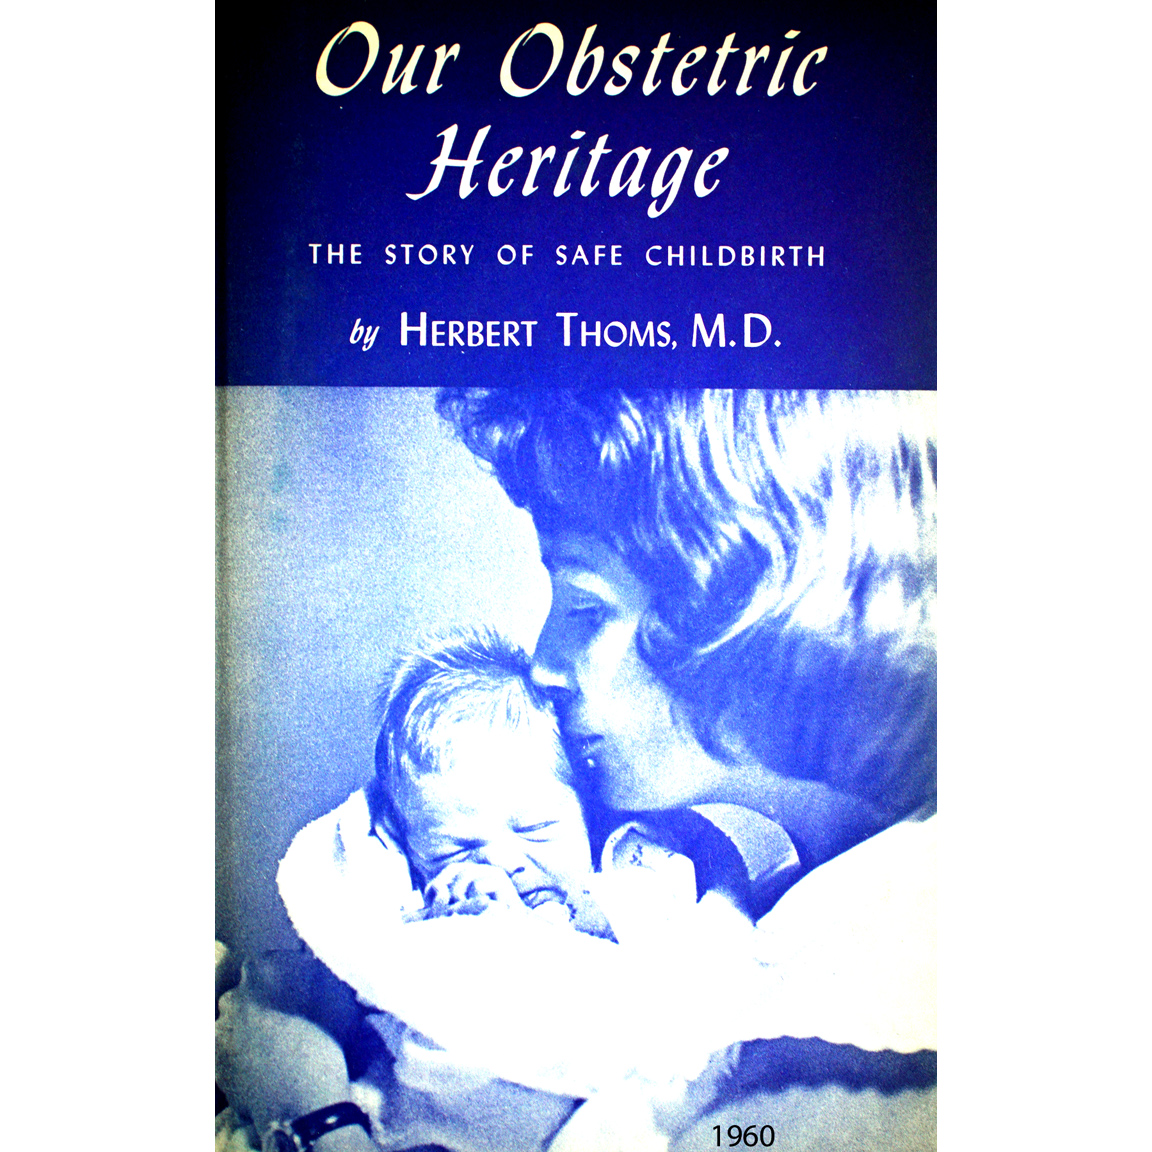 1960-THOMS-Our Obstetric Heritage-title page